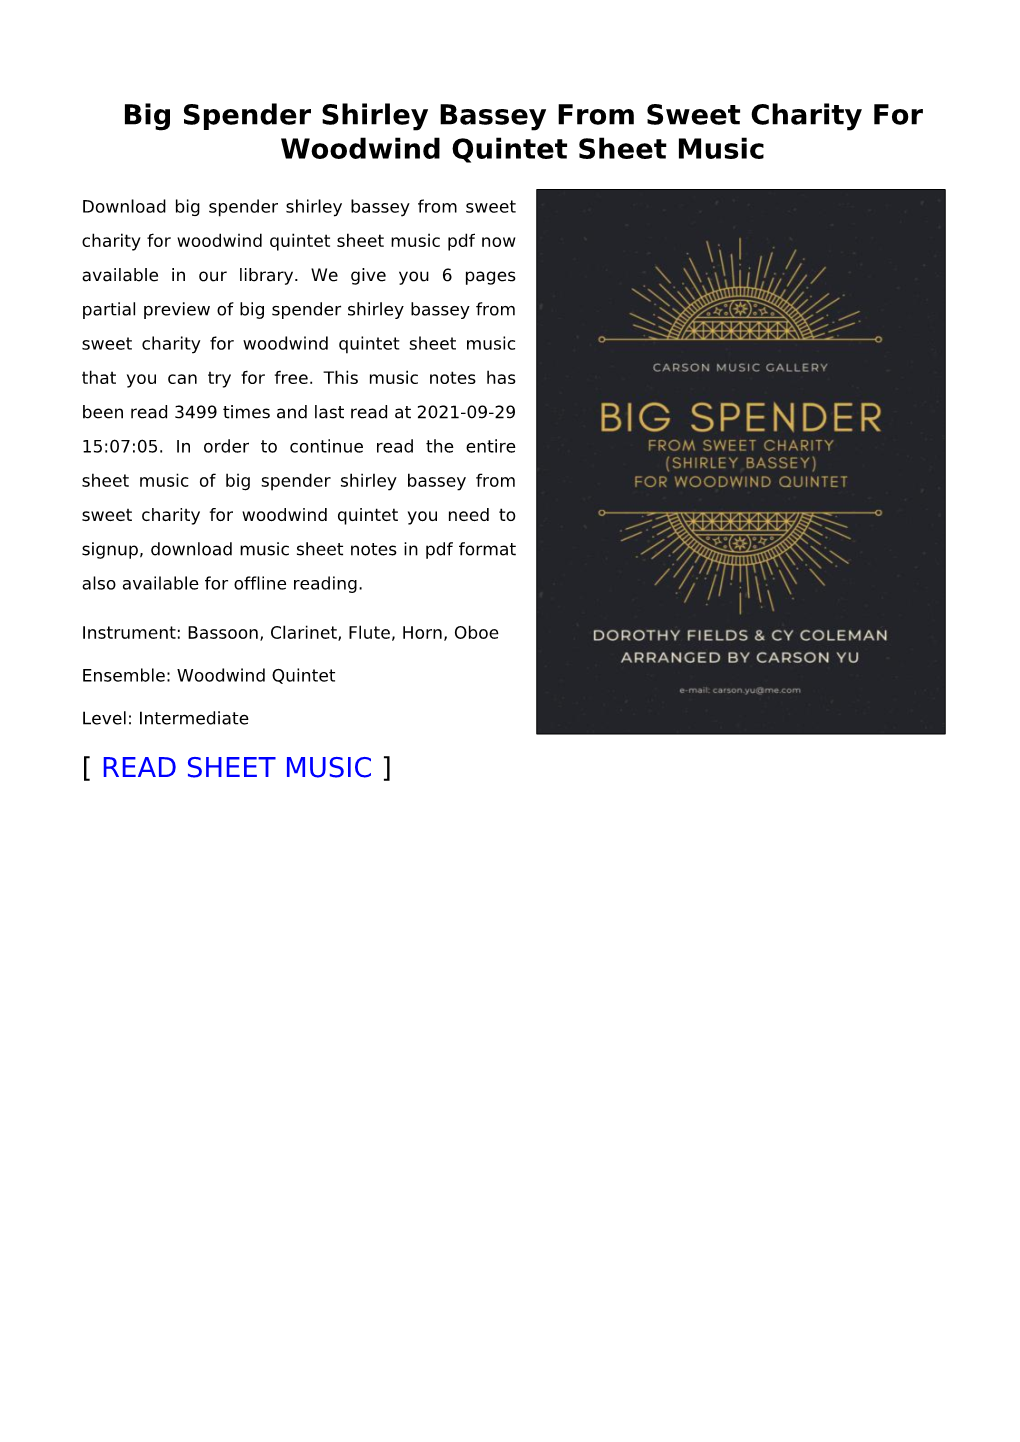 Big Spender Shirley Bassey from Sweet Charity for Woodwind Quintet Sheet Music